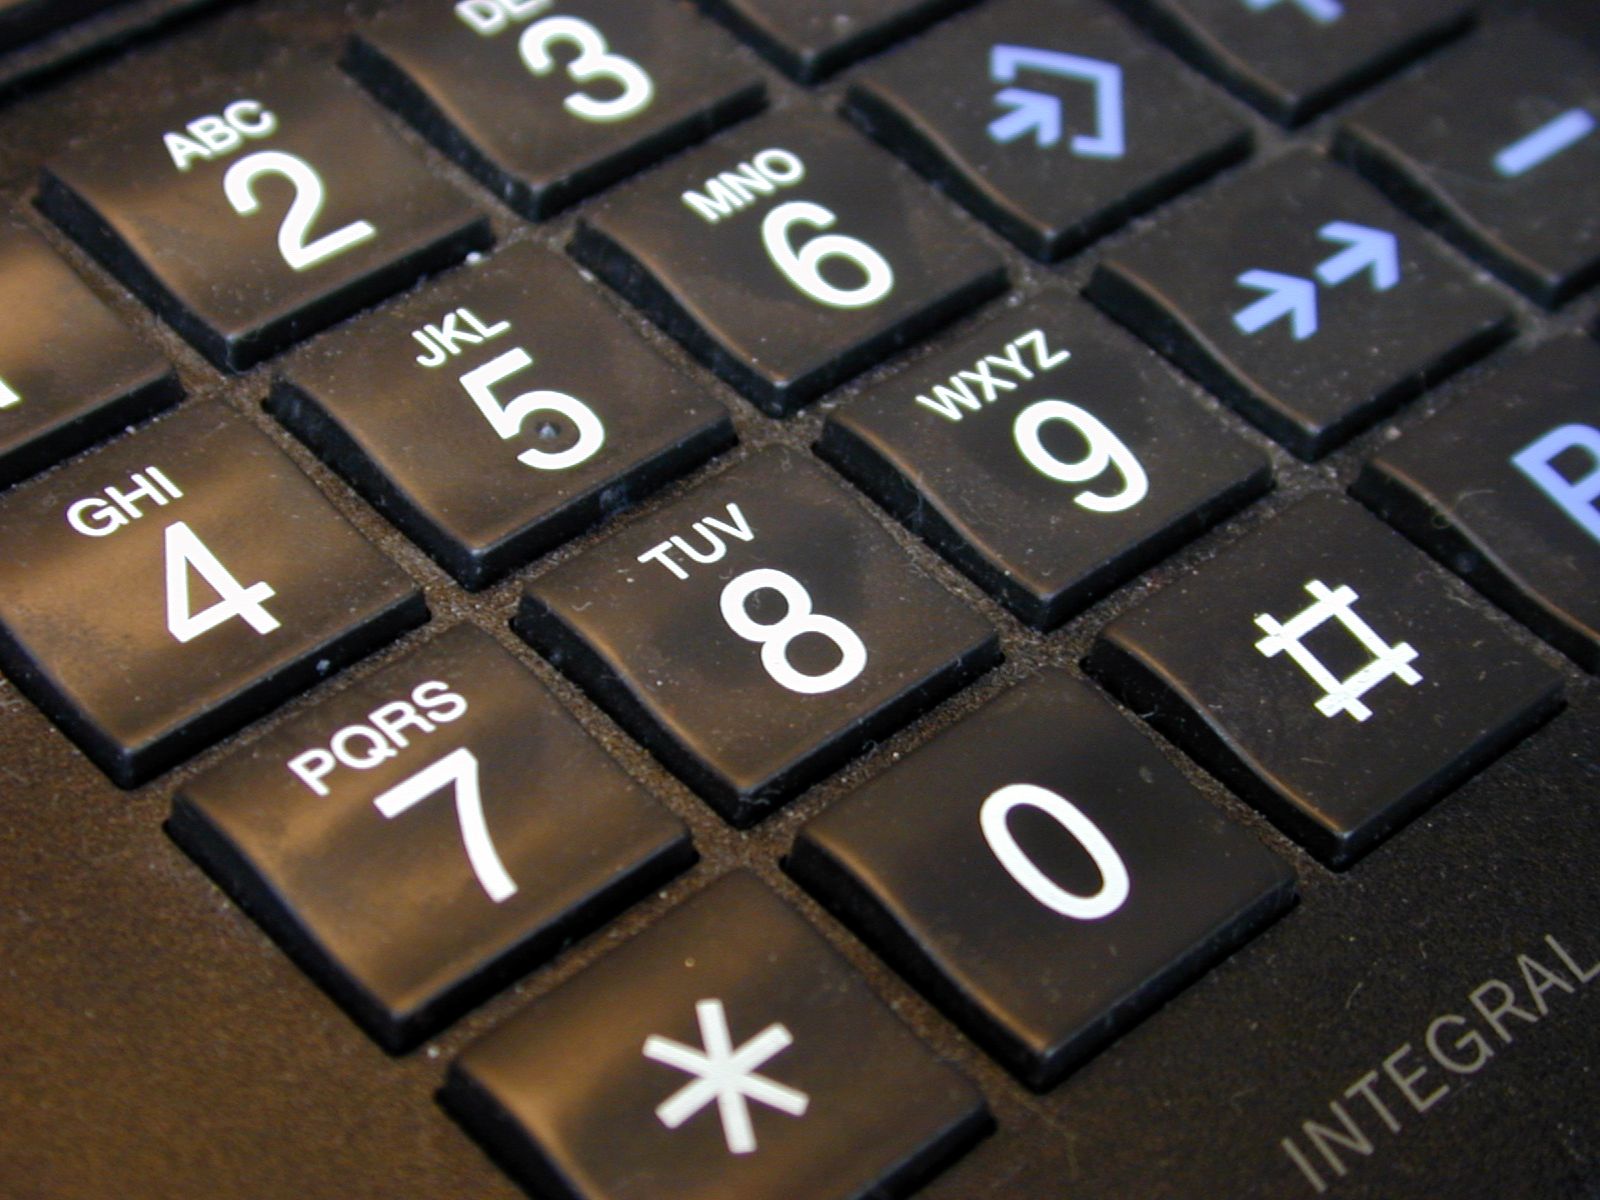 keyboard numbers button number button black and white key keys phone dialing